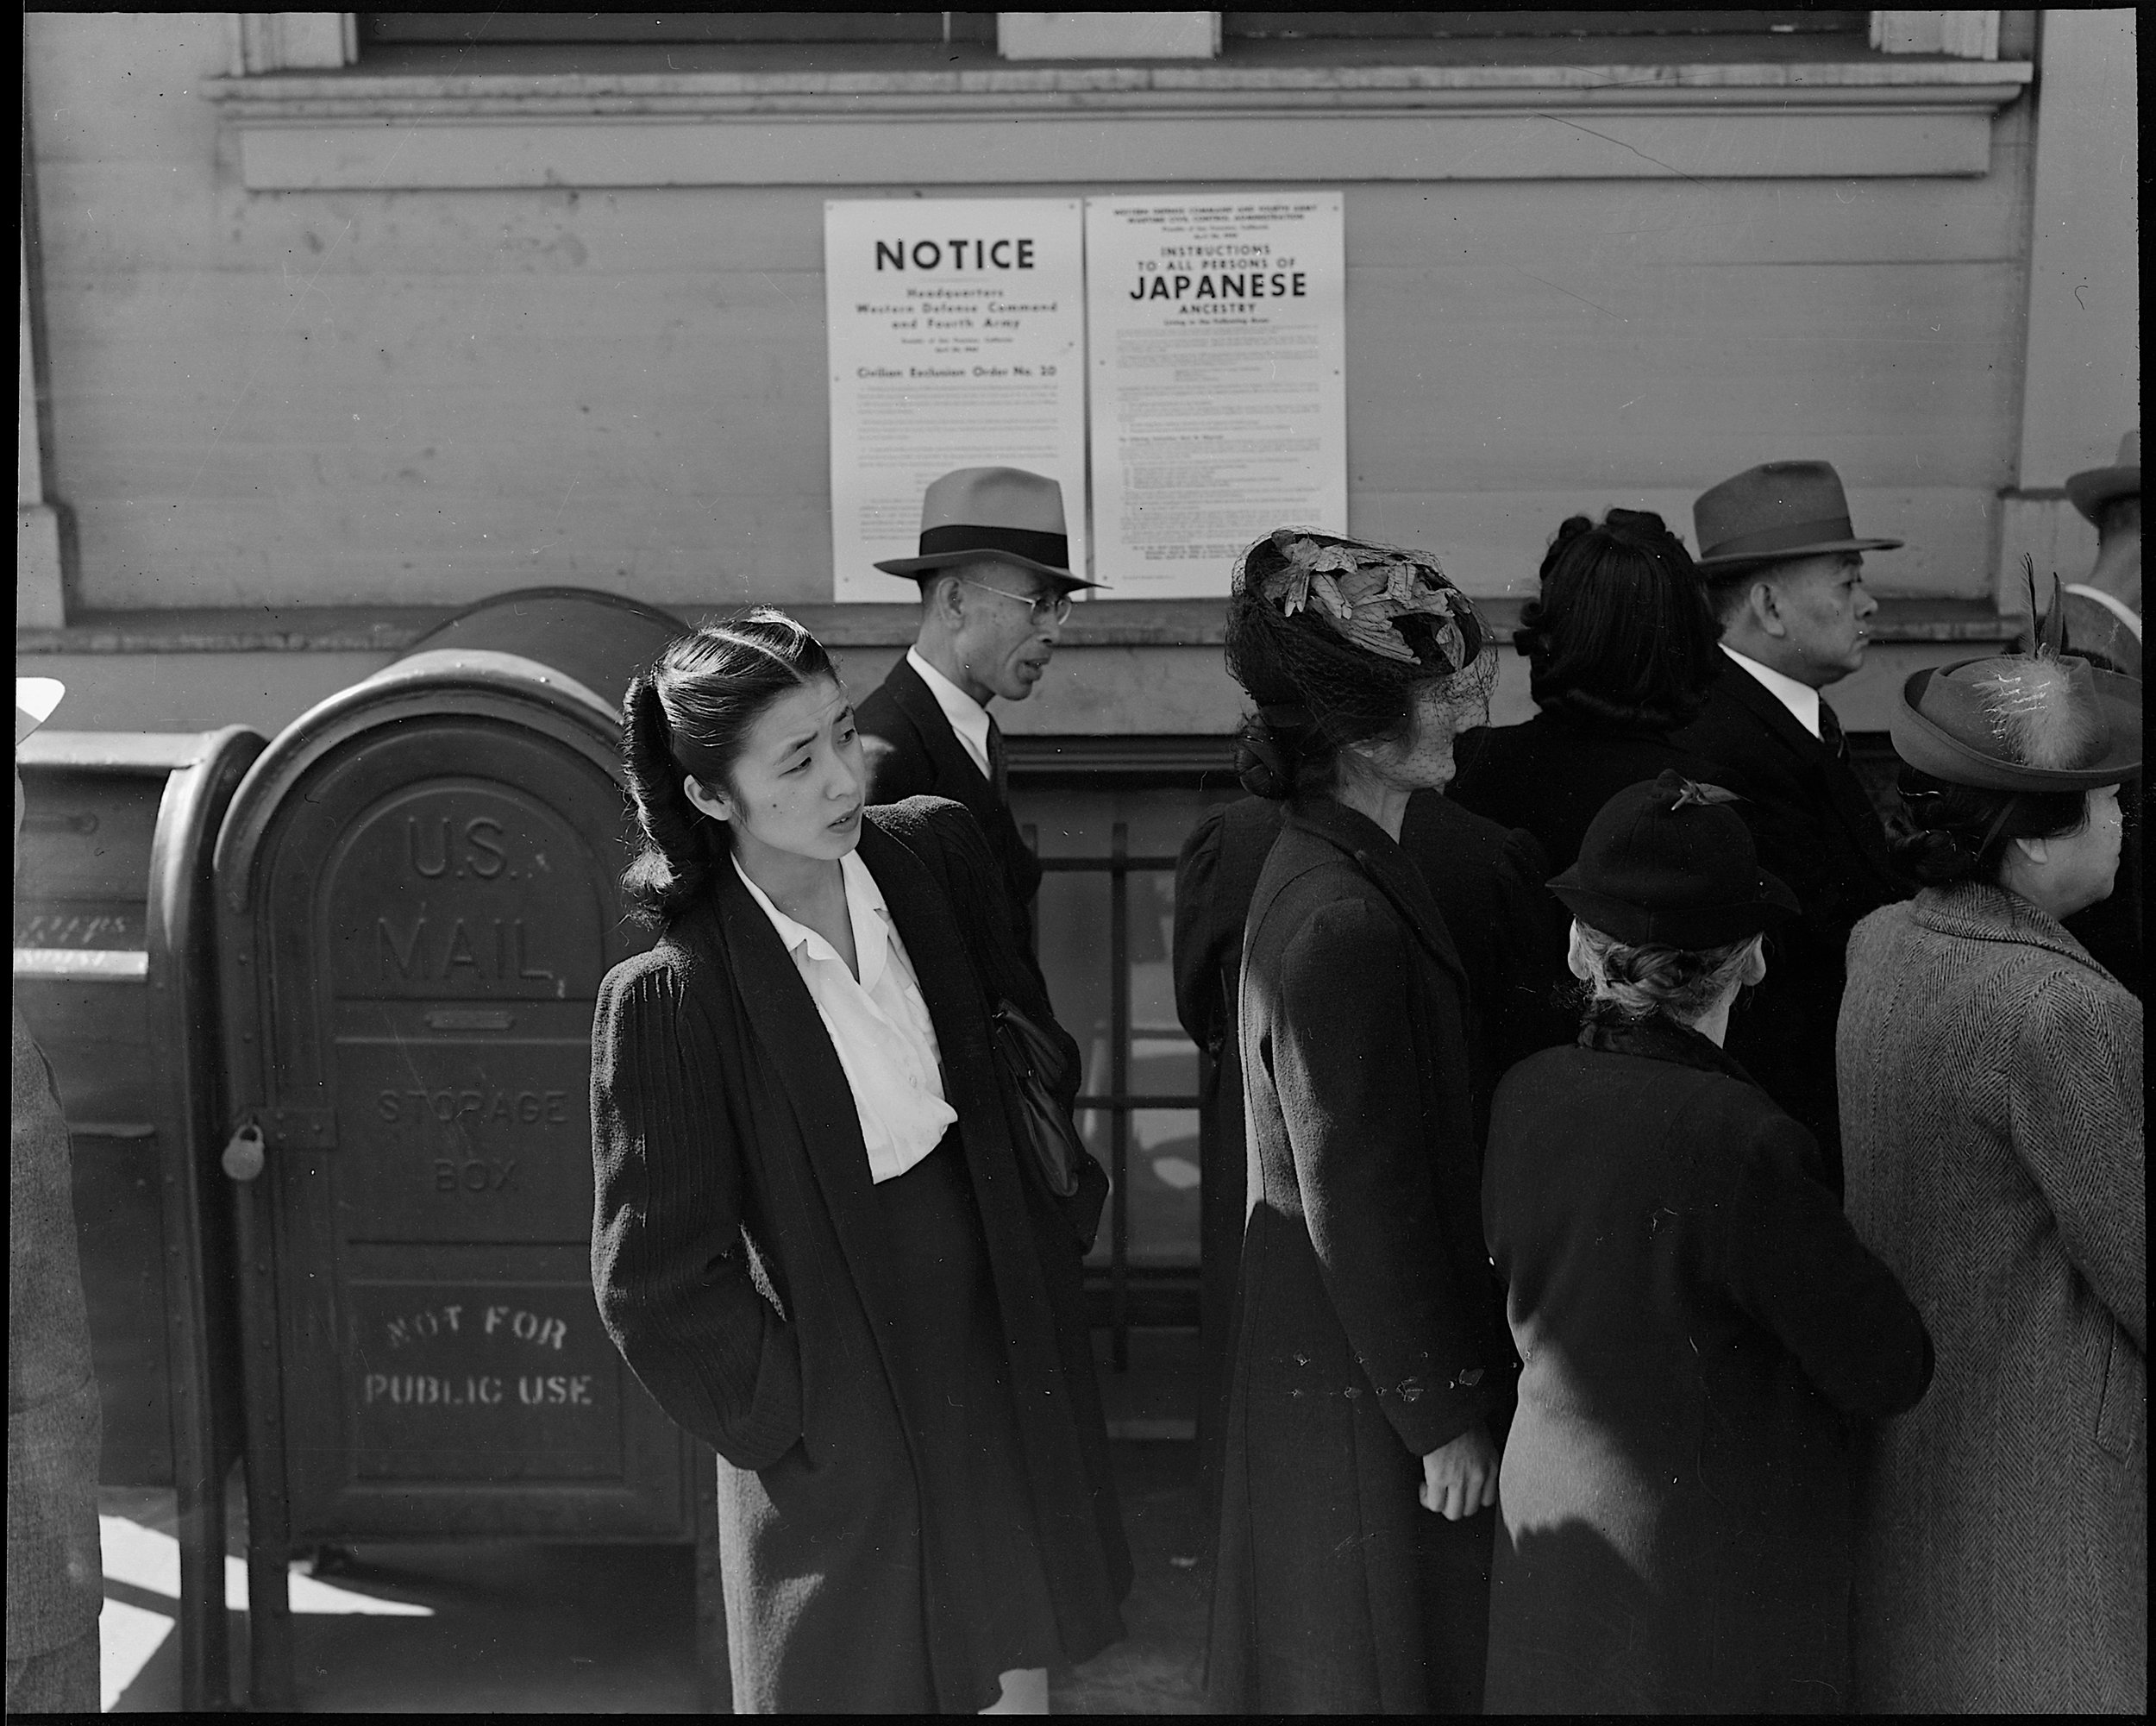 PRINT AVAILABLE April 25, 1942 — San Francisco, California. Residents of Japanese ancestry appear for registration prior to evacuation. Evacuees will be housed in War Relocation Authority centers for the duration.